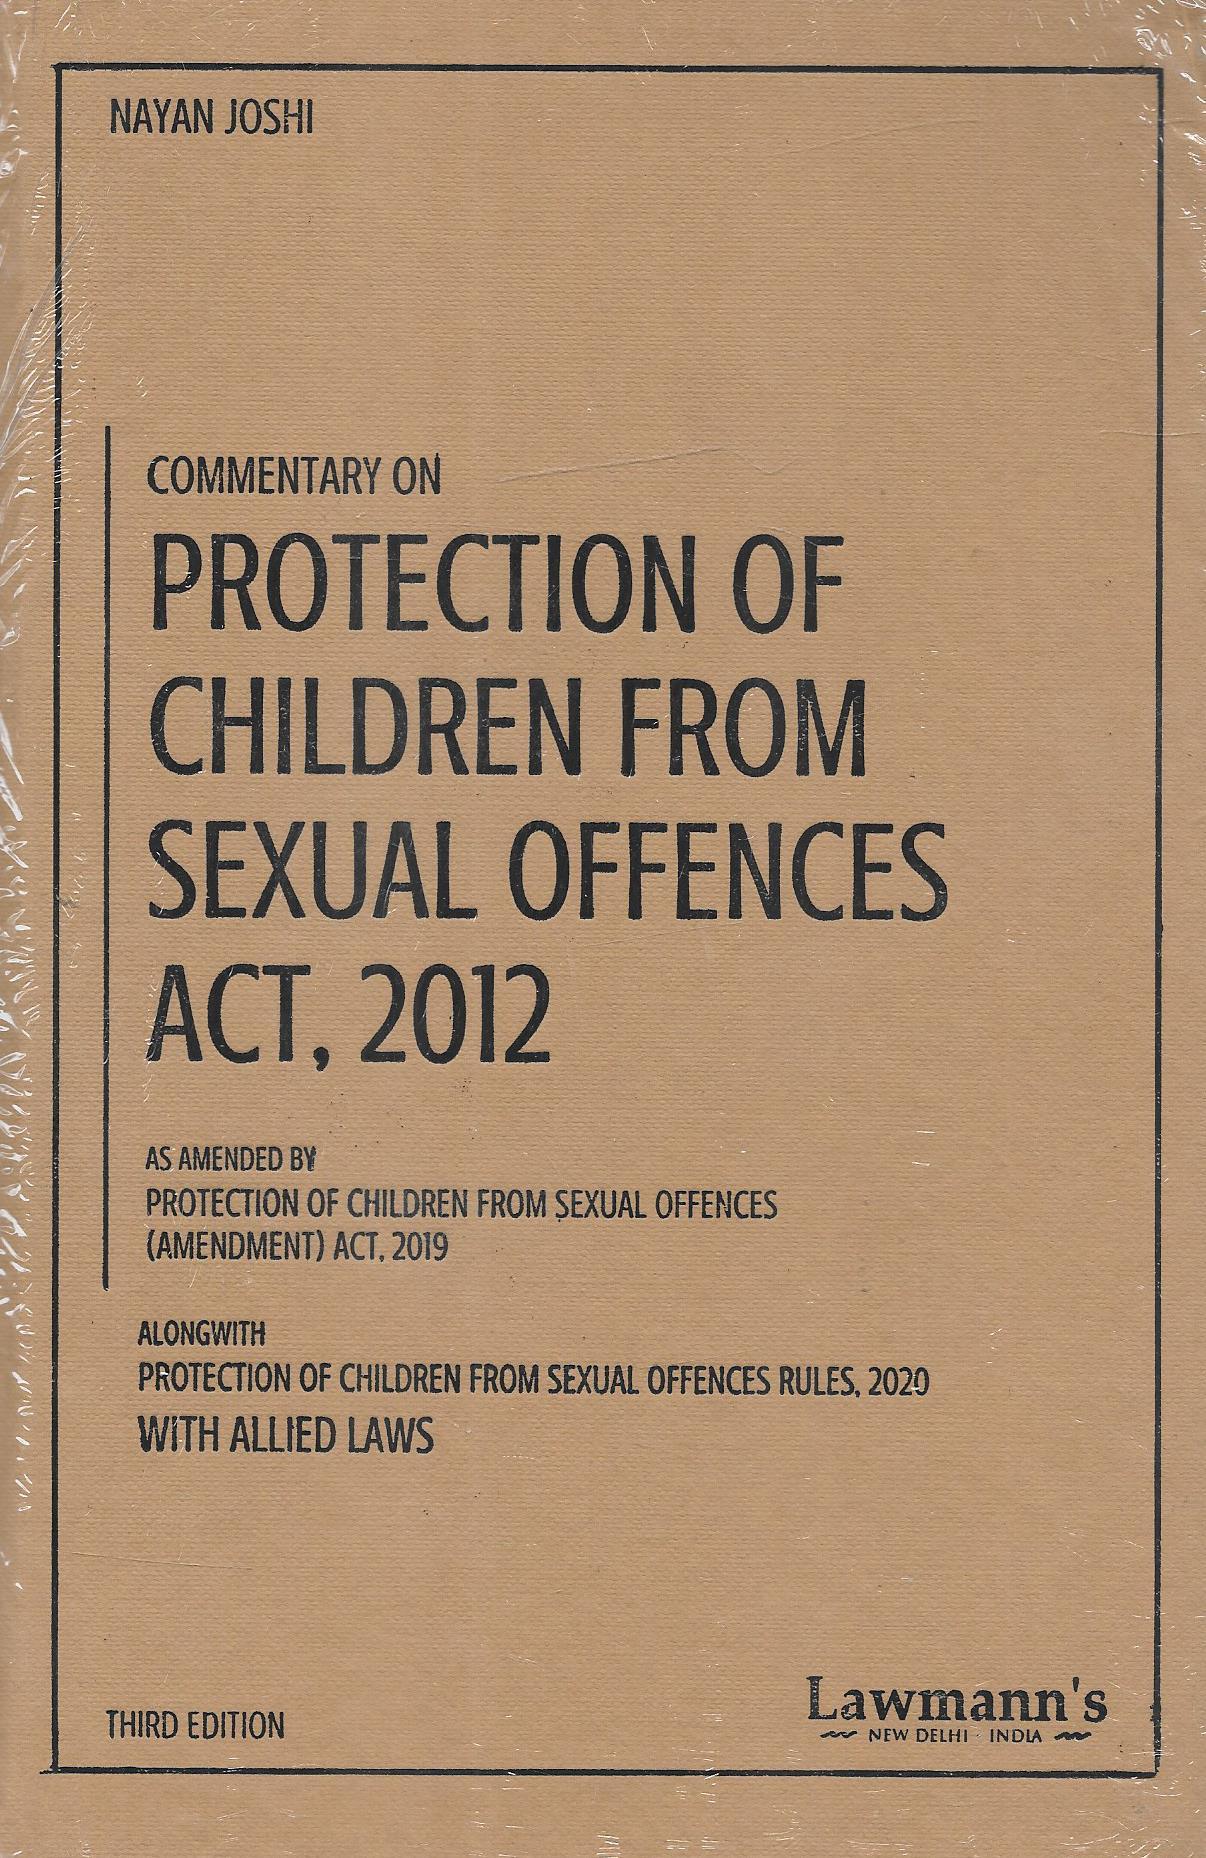 Commentary on Protection of Children from Sexual Offences Act, 2012 - M&J Services